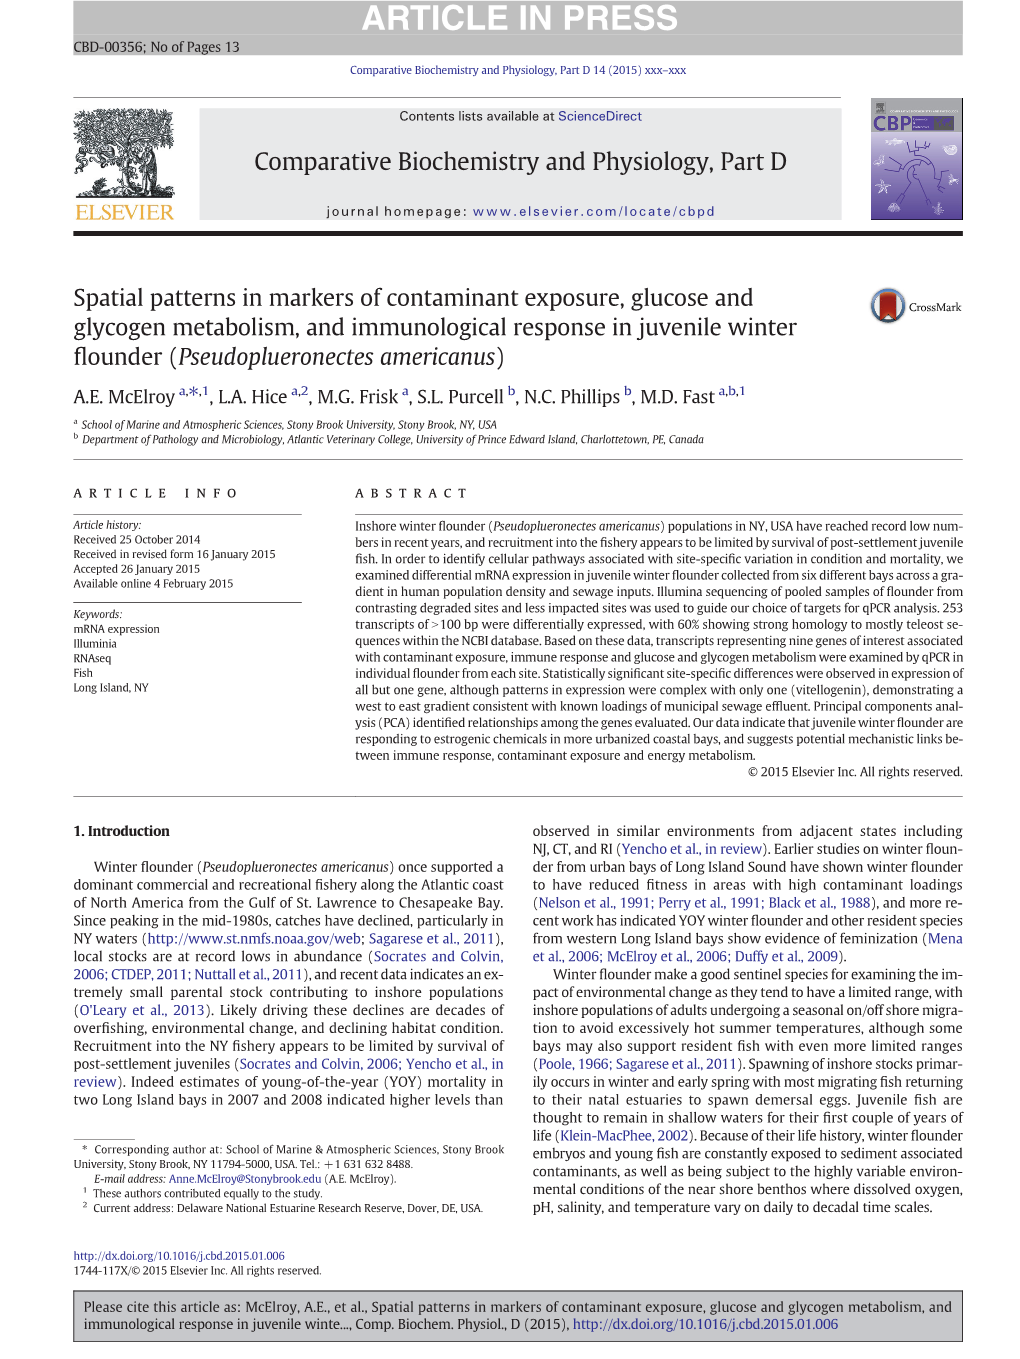 Spatial Patterns in Markers of Contaminant Exposure, Glucose And